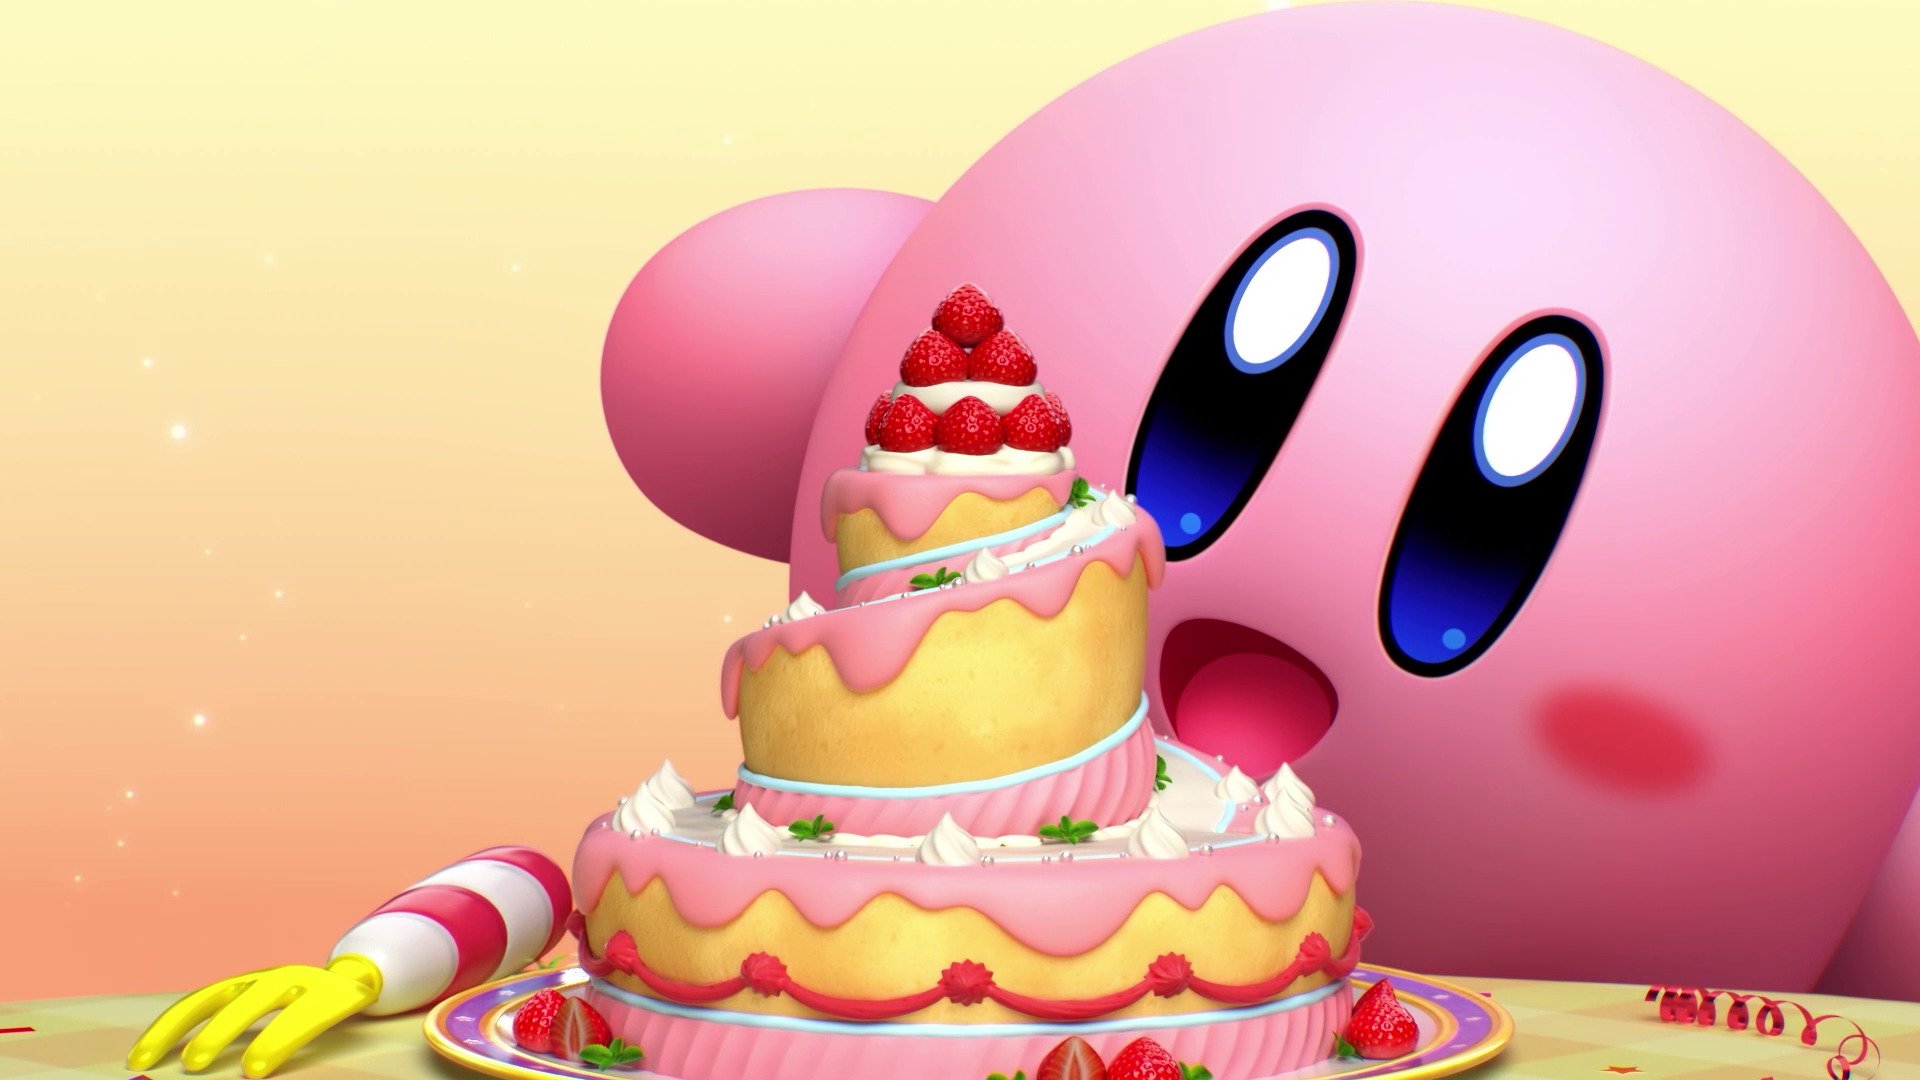 Nintendo announces multiplayer game Kirby's Dream Buffet for Switch